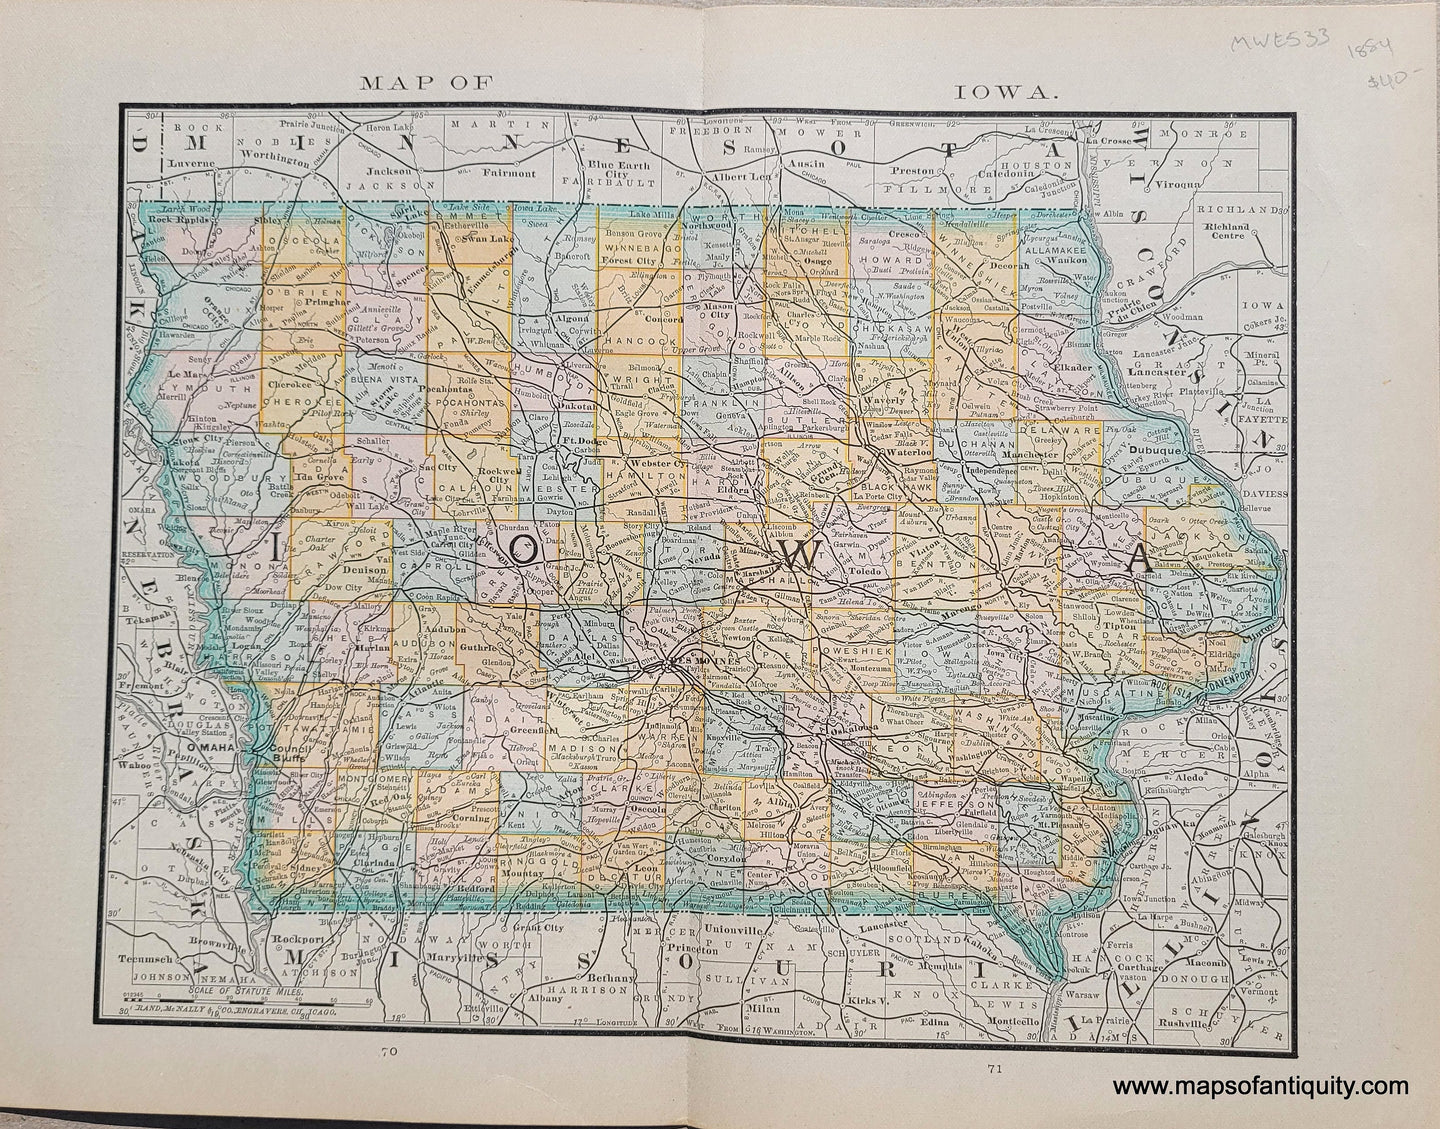 Genuine Antique Map-Map of Iowa-1884-Rand McNally & Co-Maps-Of-Antiquity